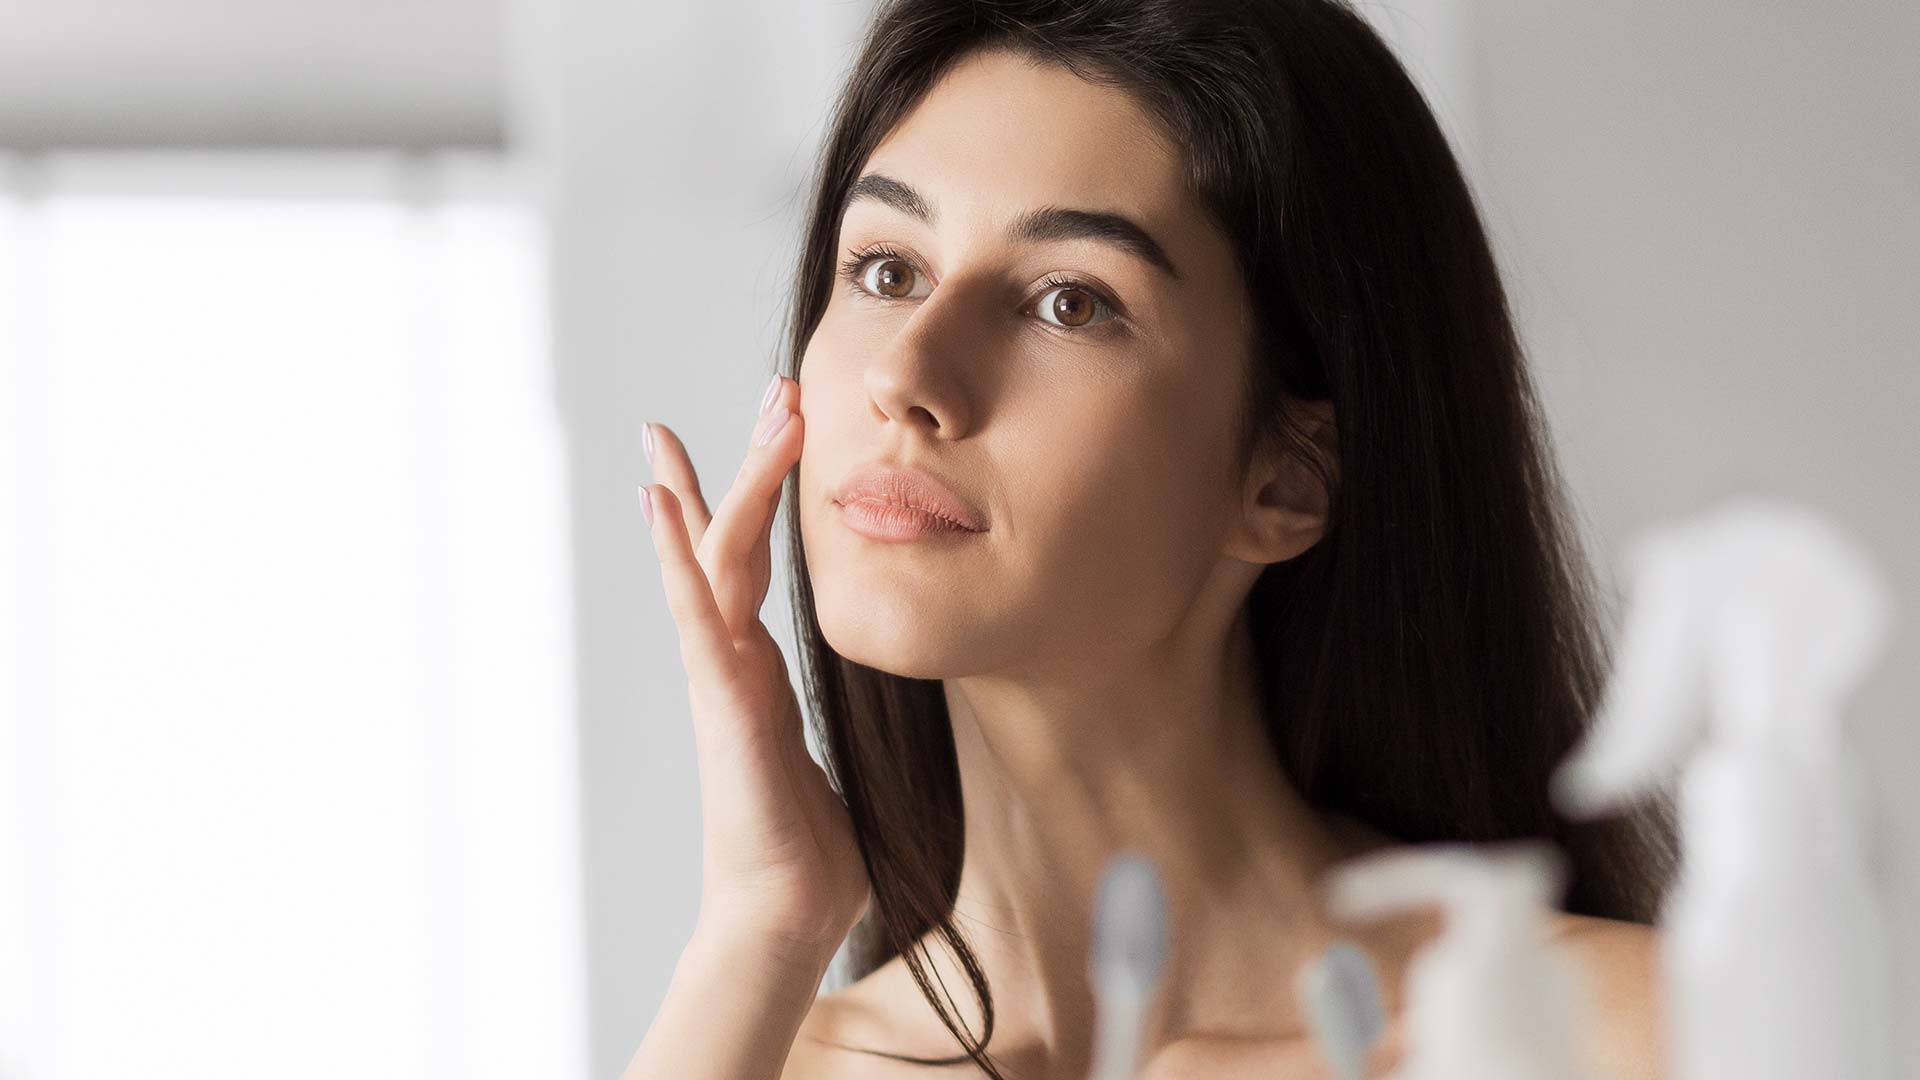 How To Tighten The Look Of Your Skin With Antioxidants